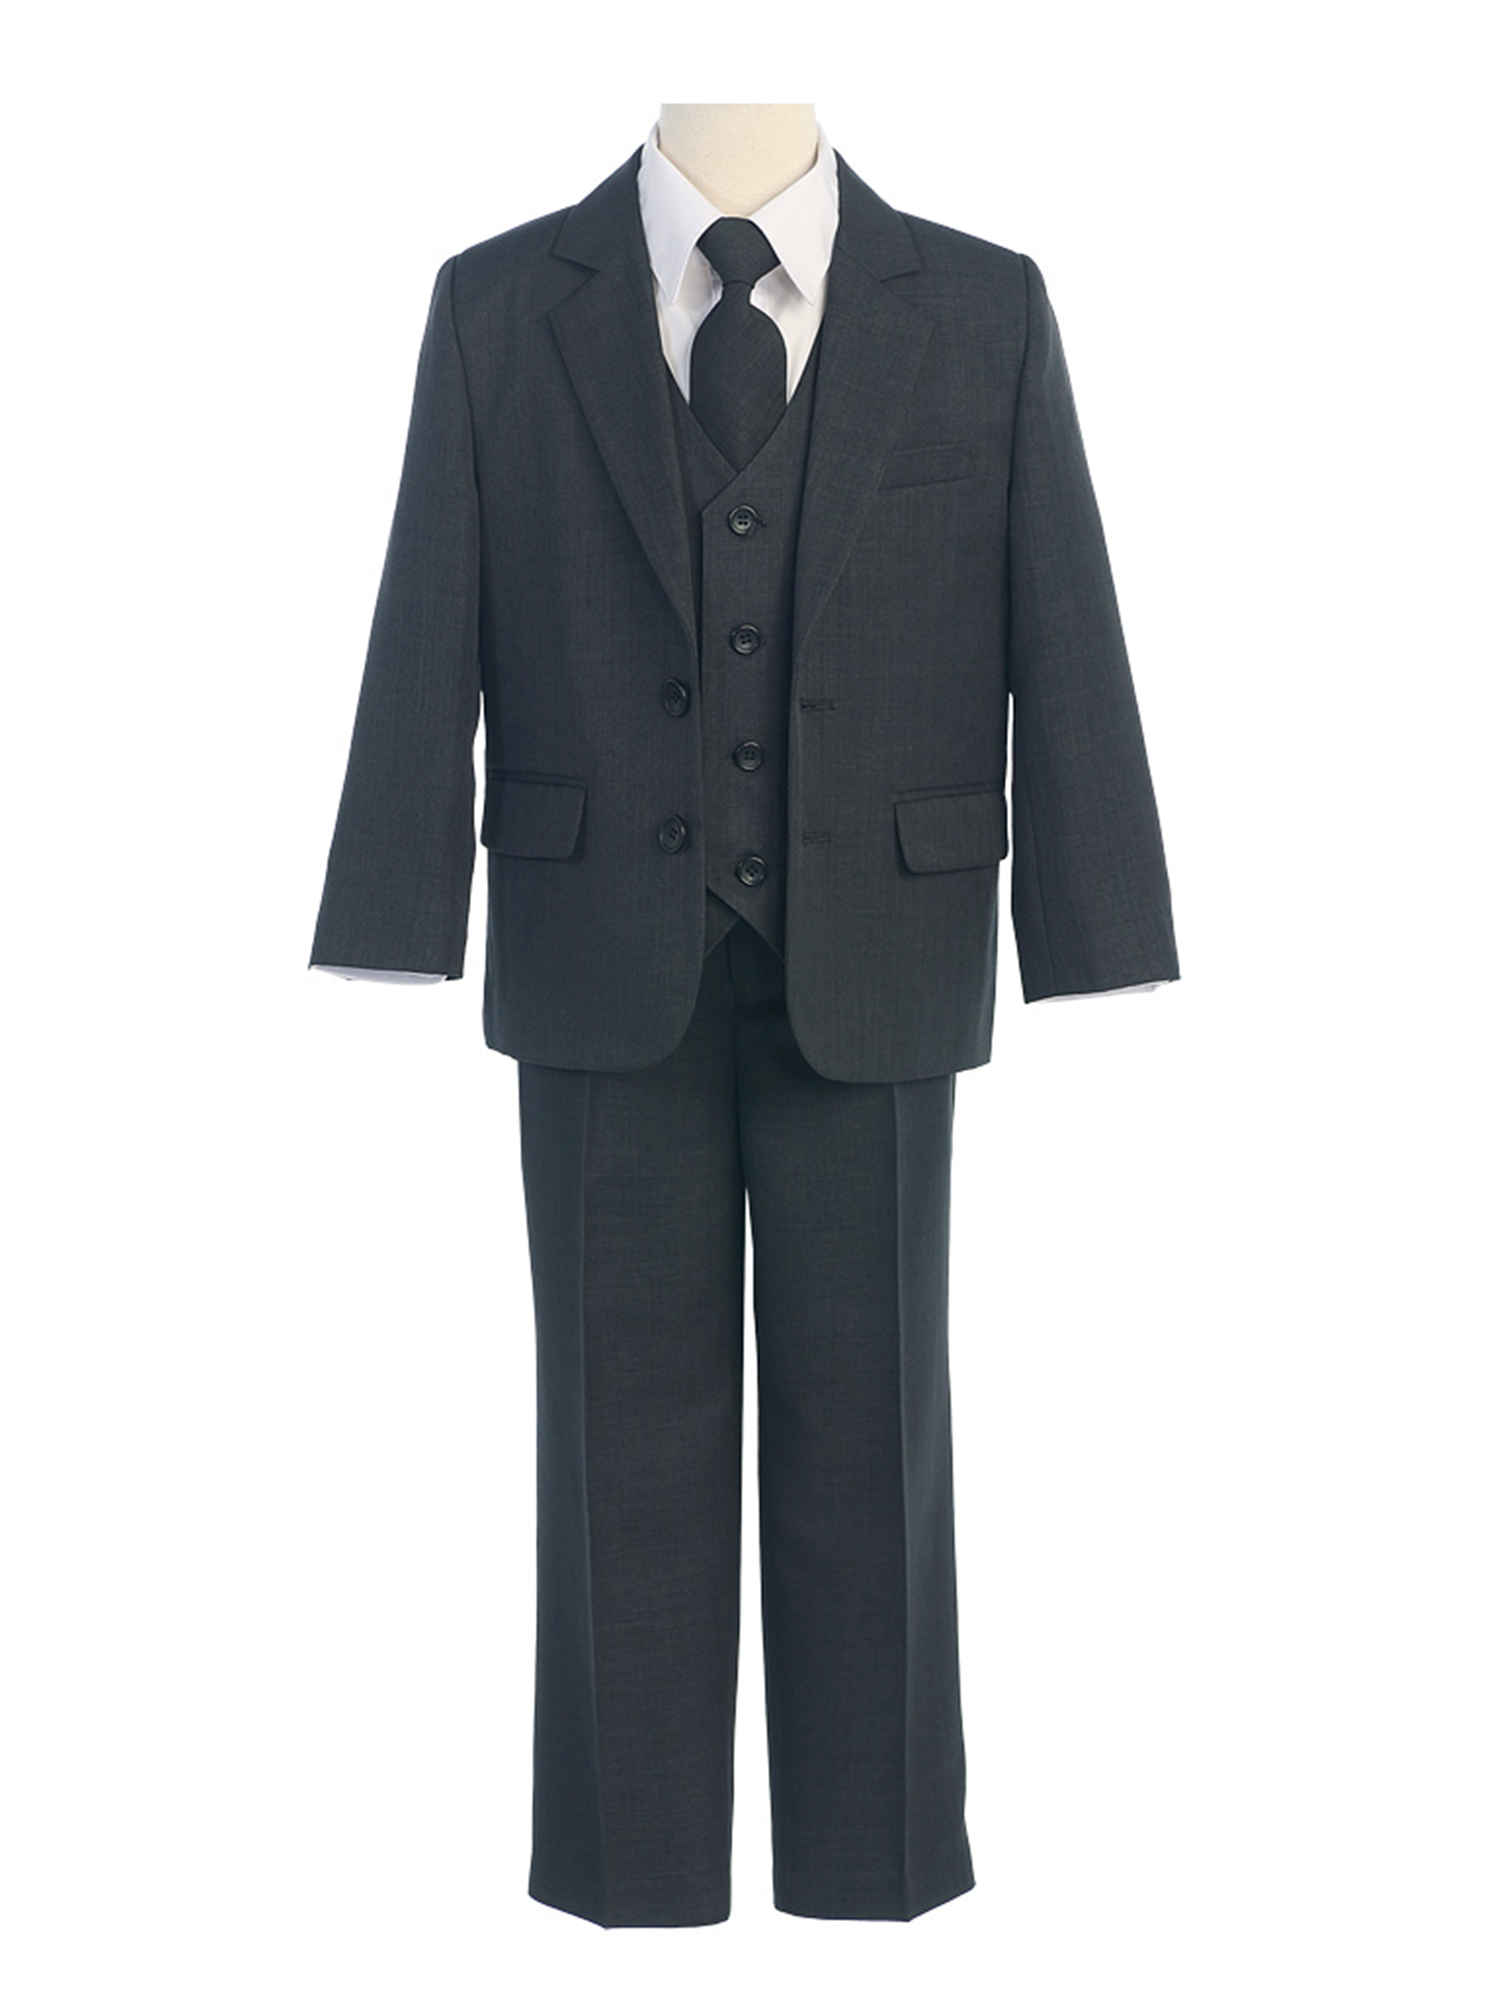 COLE Boys Suit with Shirt and Vest (5-Piece) - (8 Husky, Charcoal Grey)